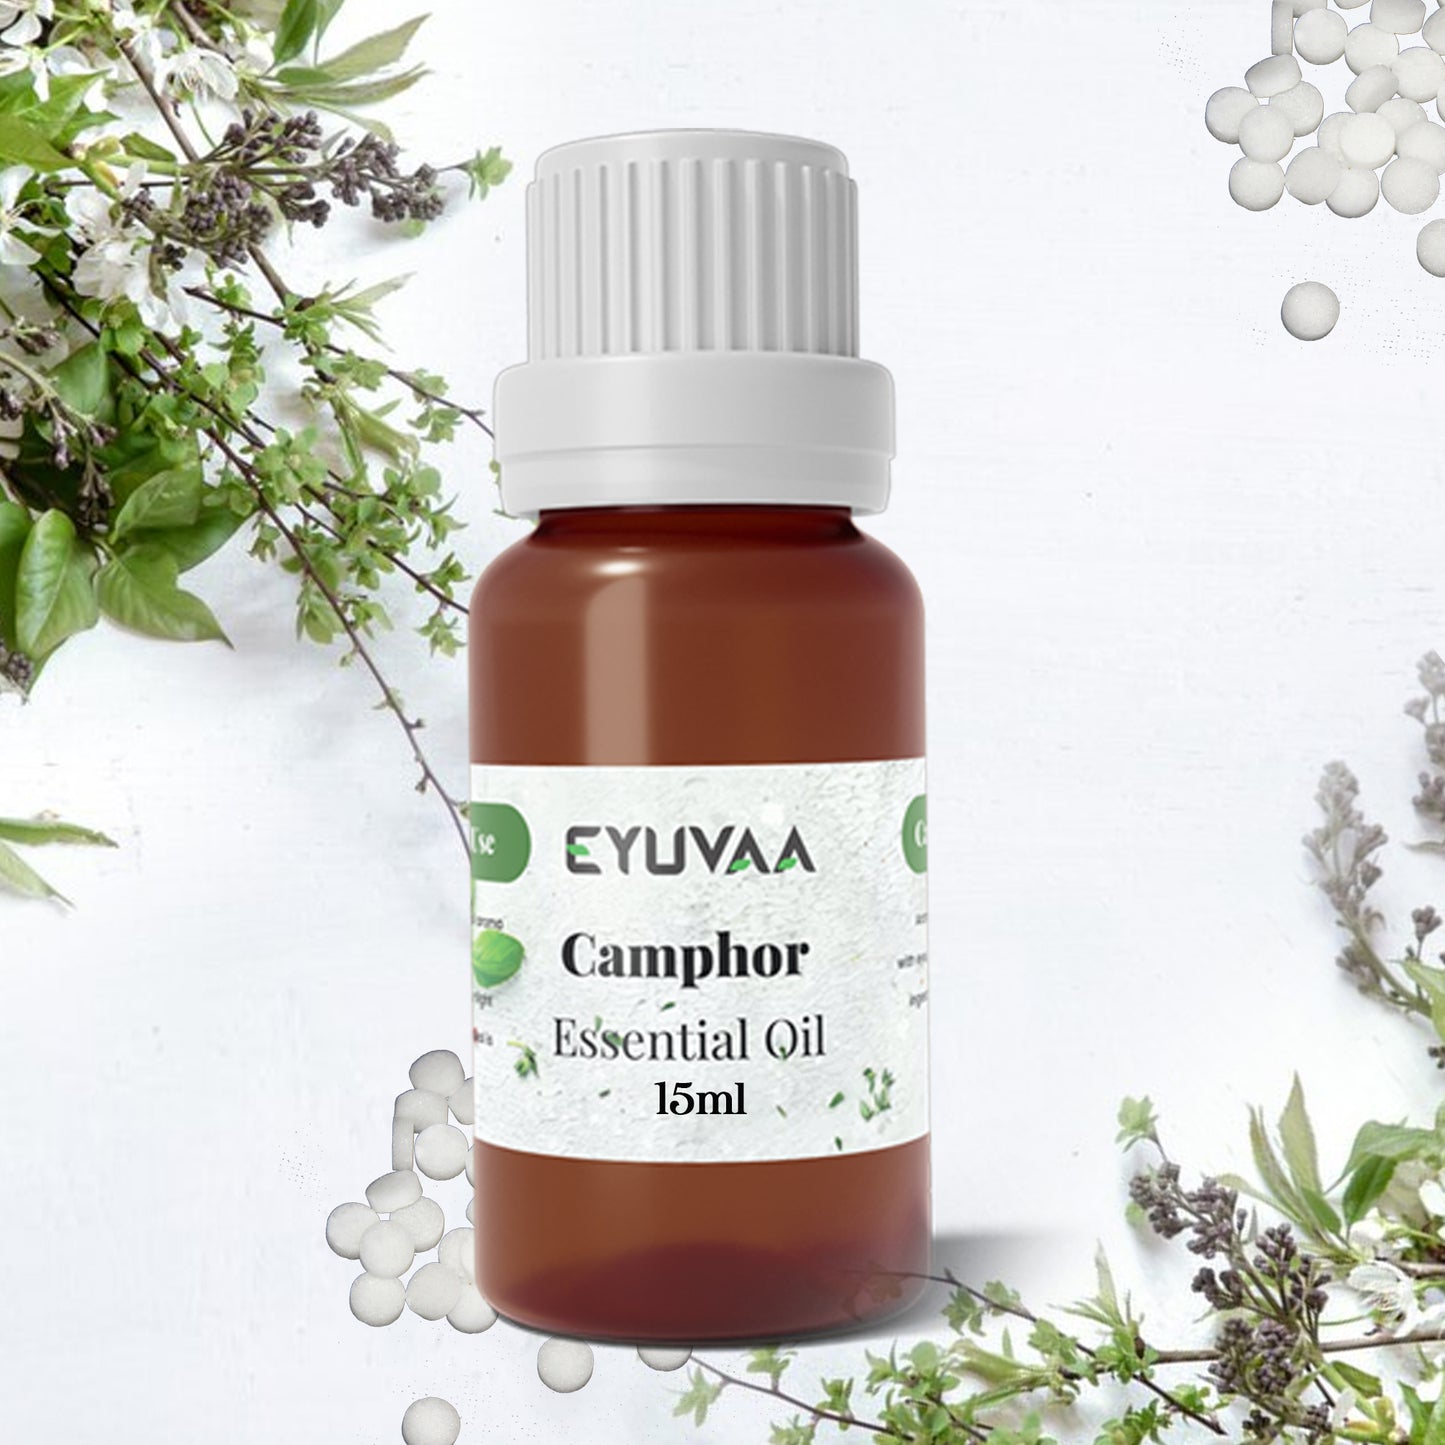 15 Ml  Essential oil, Fragrance oil, Aromatherapy Oil for Home care, Aroma Oil for home fragrance, Essential oil for candle-making, Spa treatments